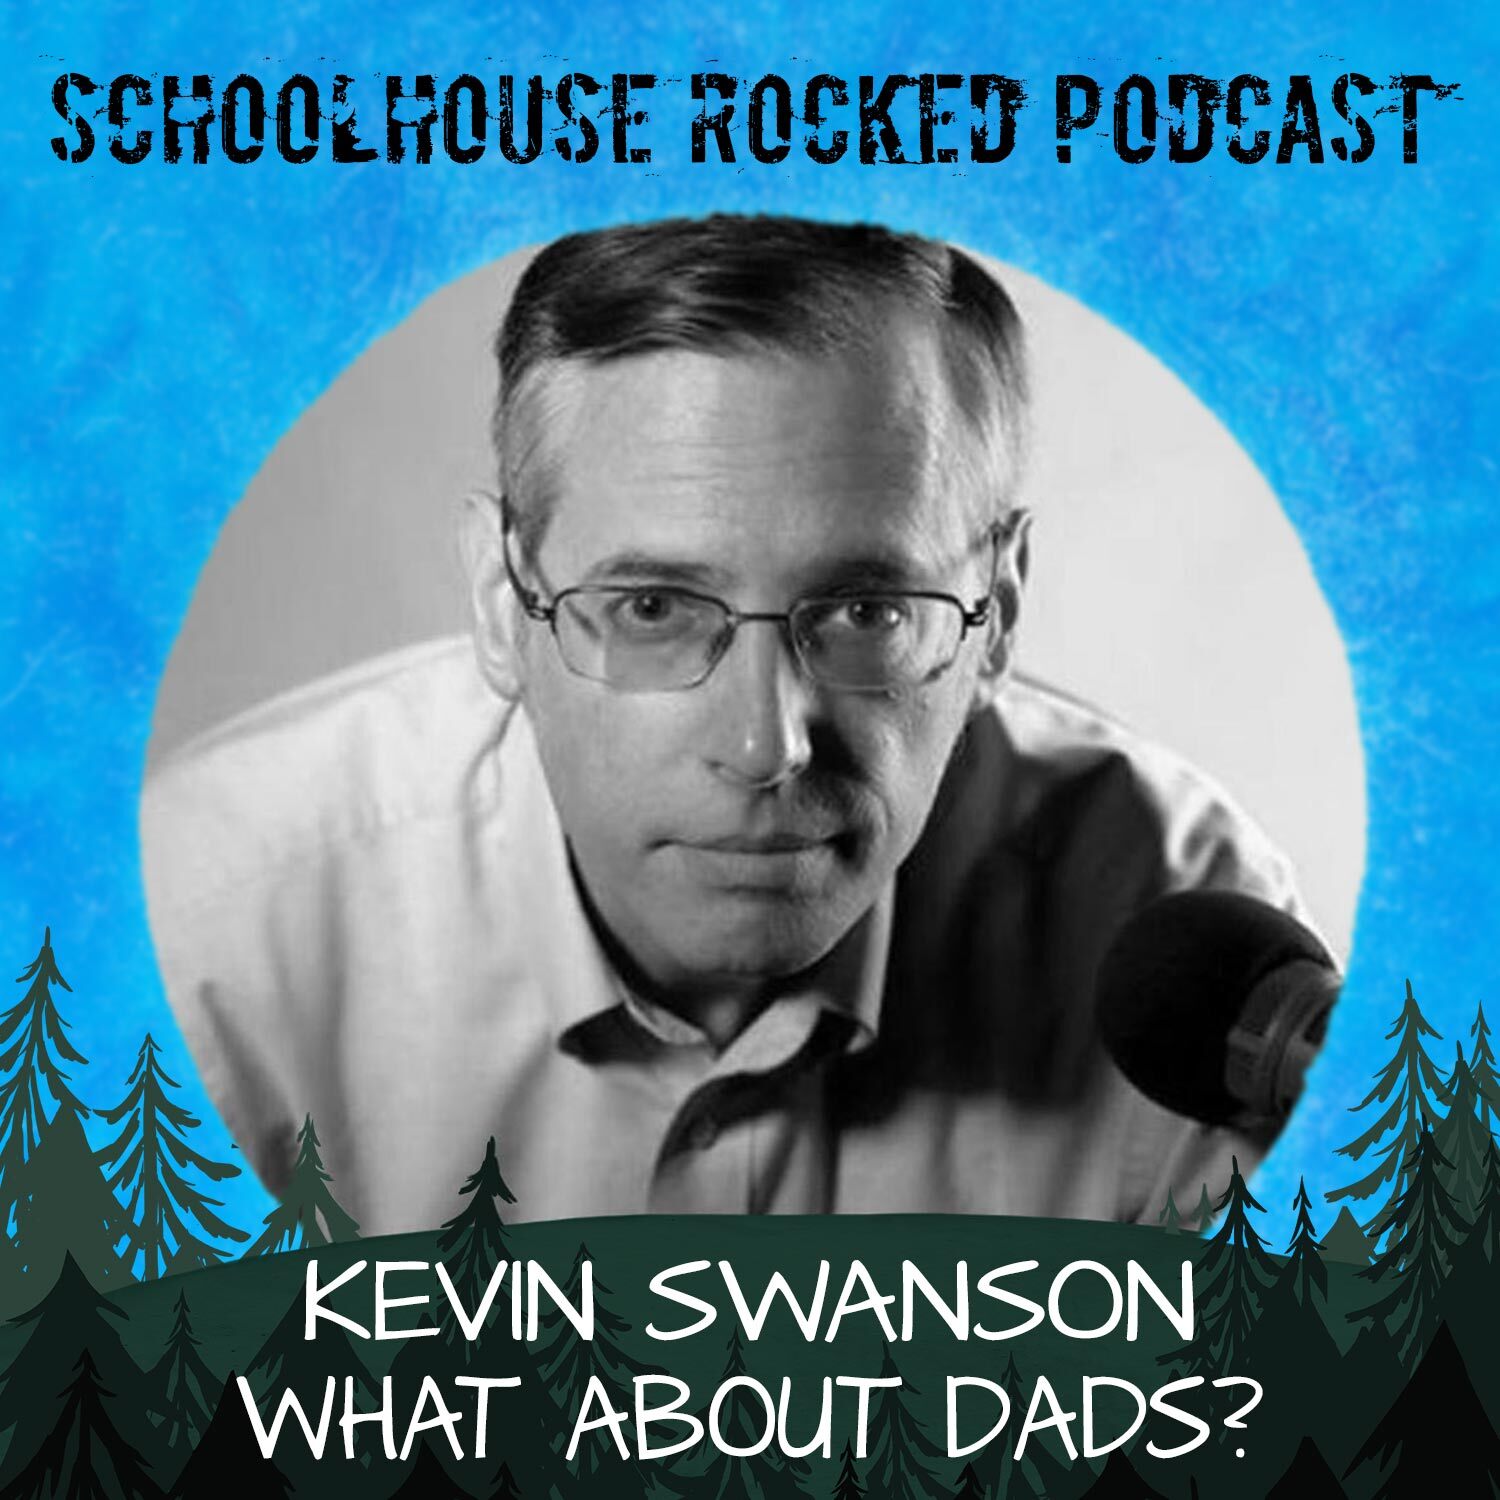 Kevin_Swanson_-_What_About_Dads_-_Podcast_Thumbaxl34.jpg